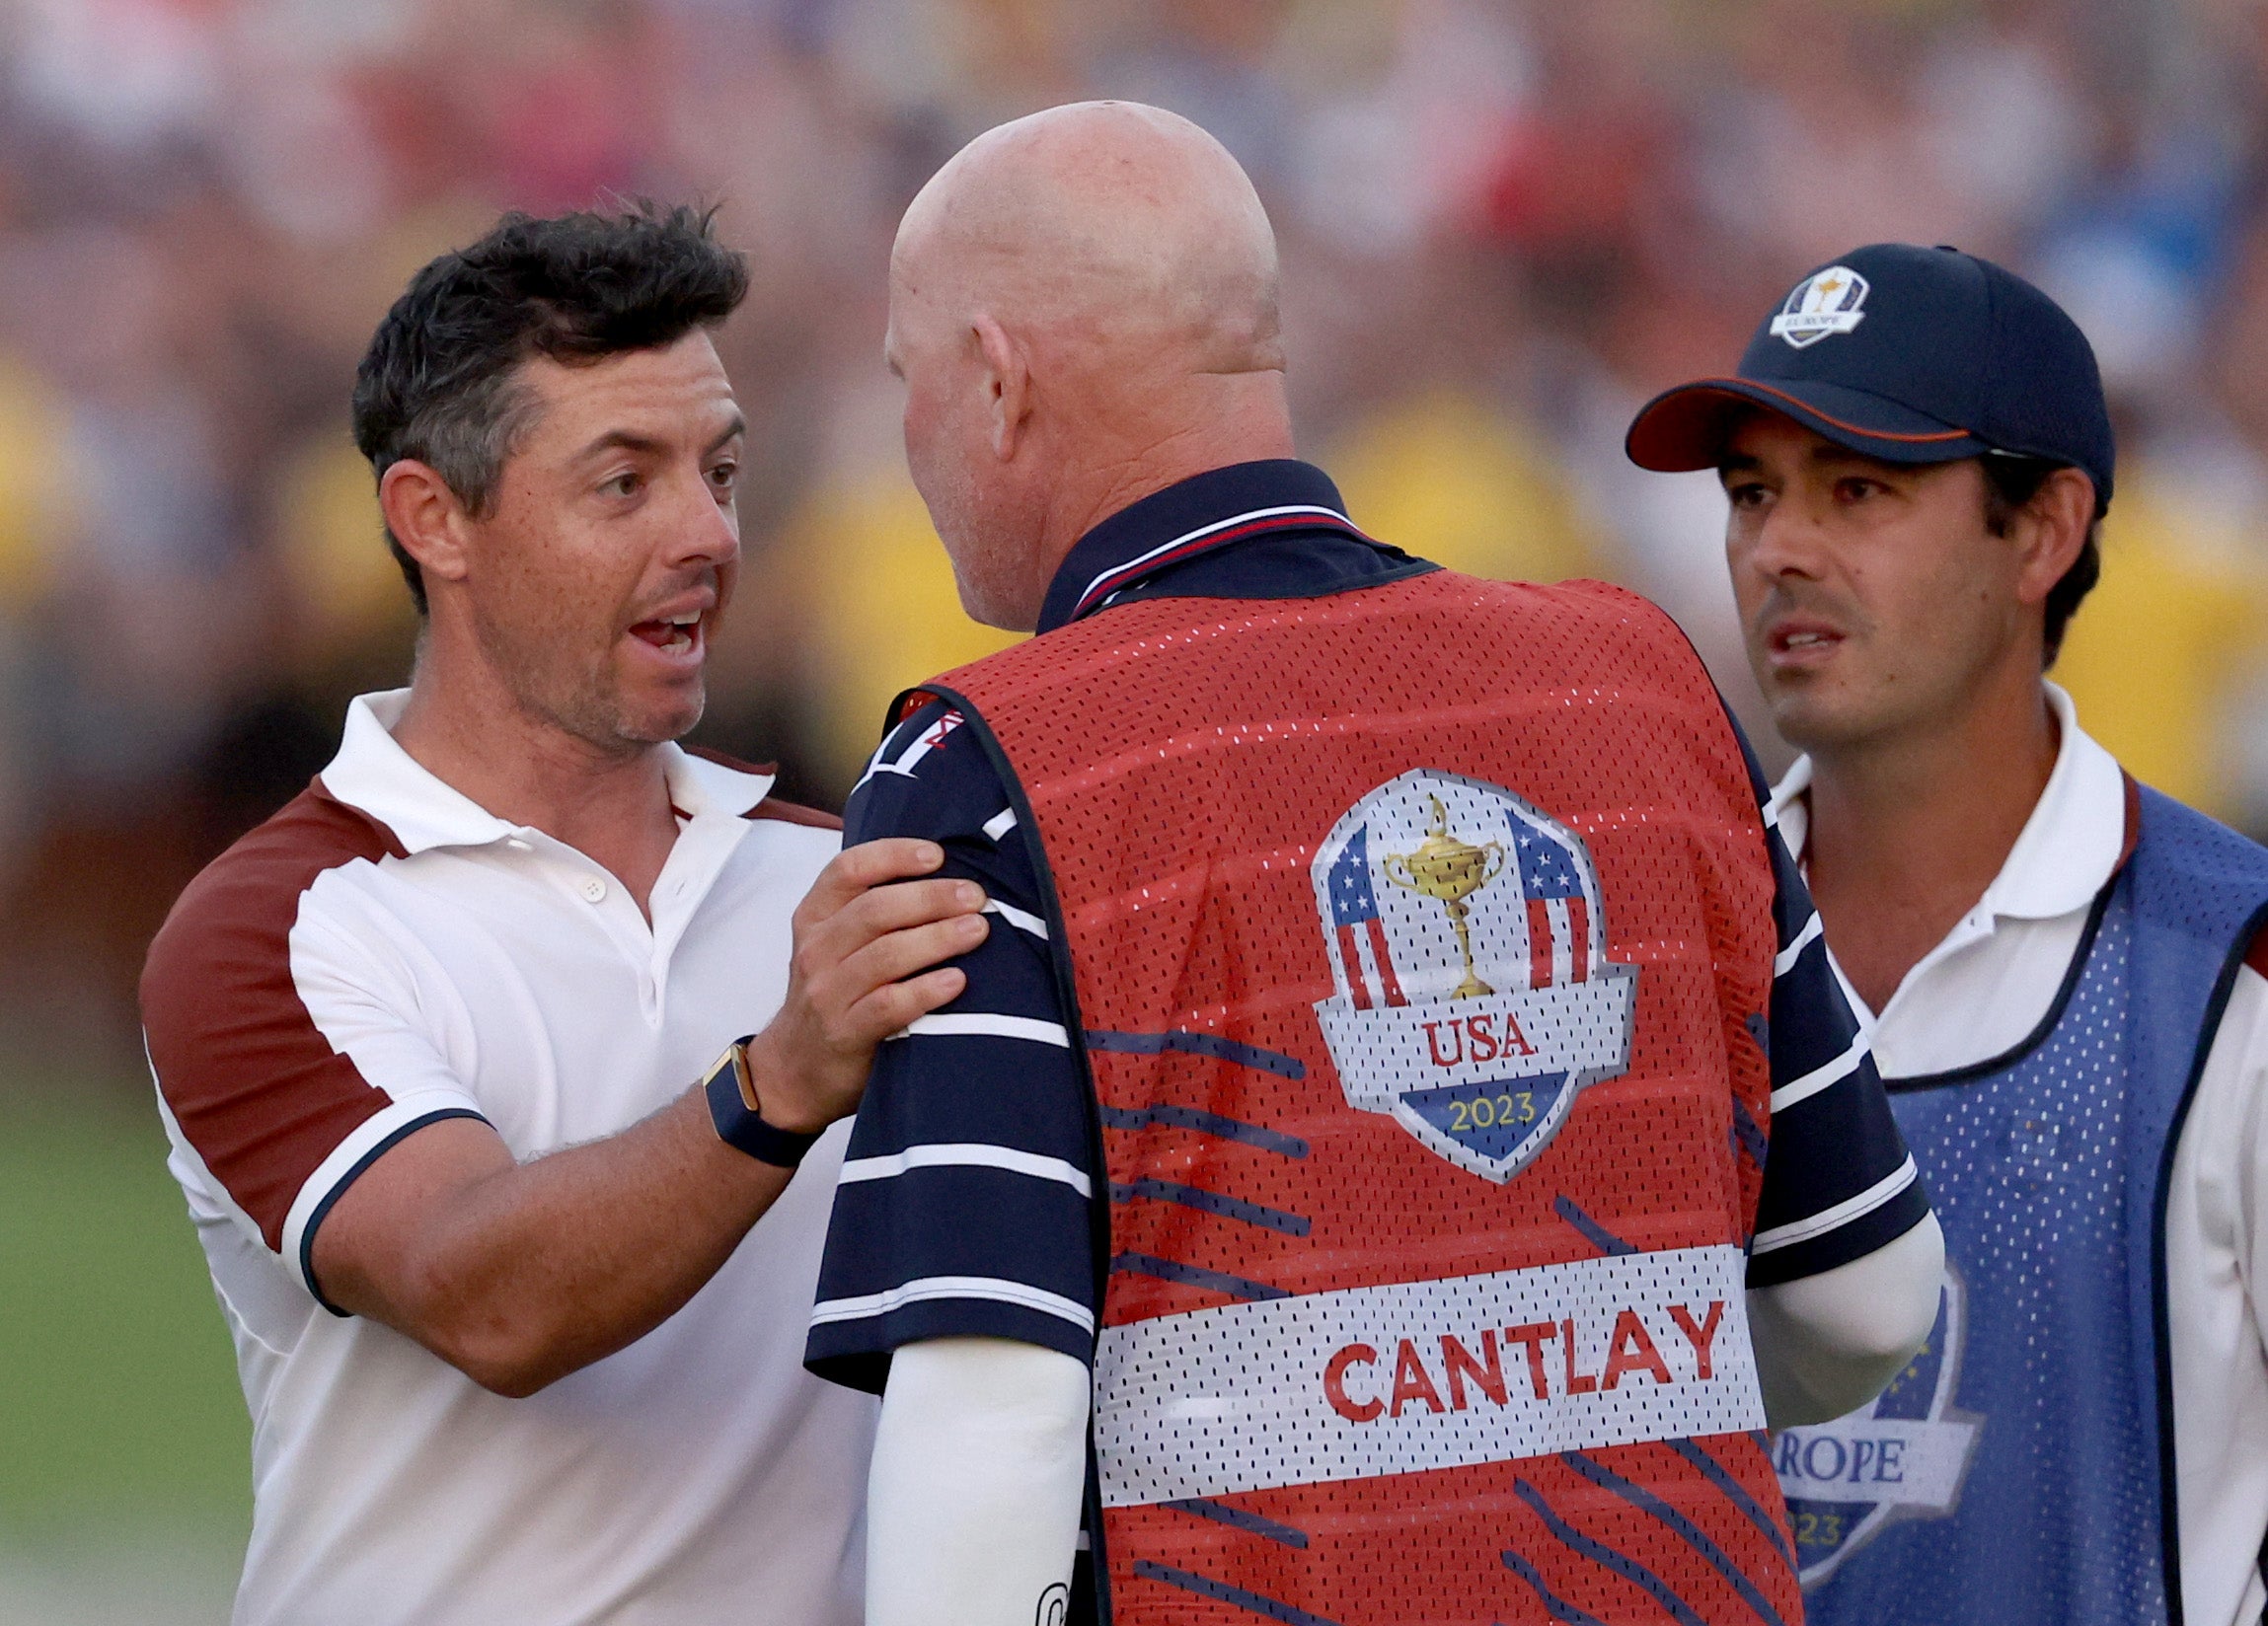 Rory McIlroy (left) clashed with Patrick Cantlay and his caddie Joe LaCava at the Ryder Cup